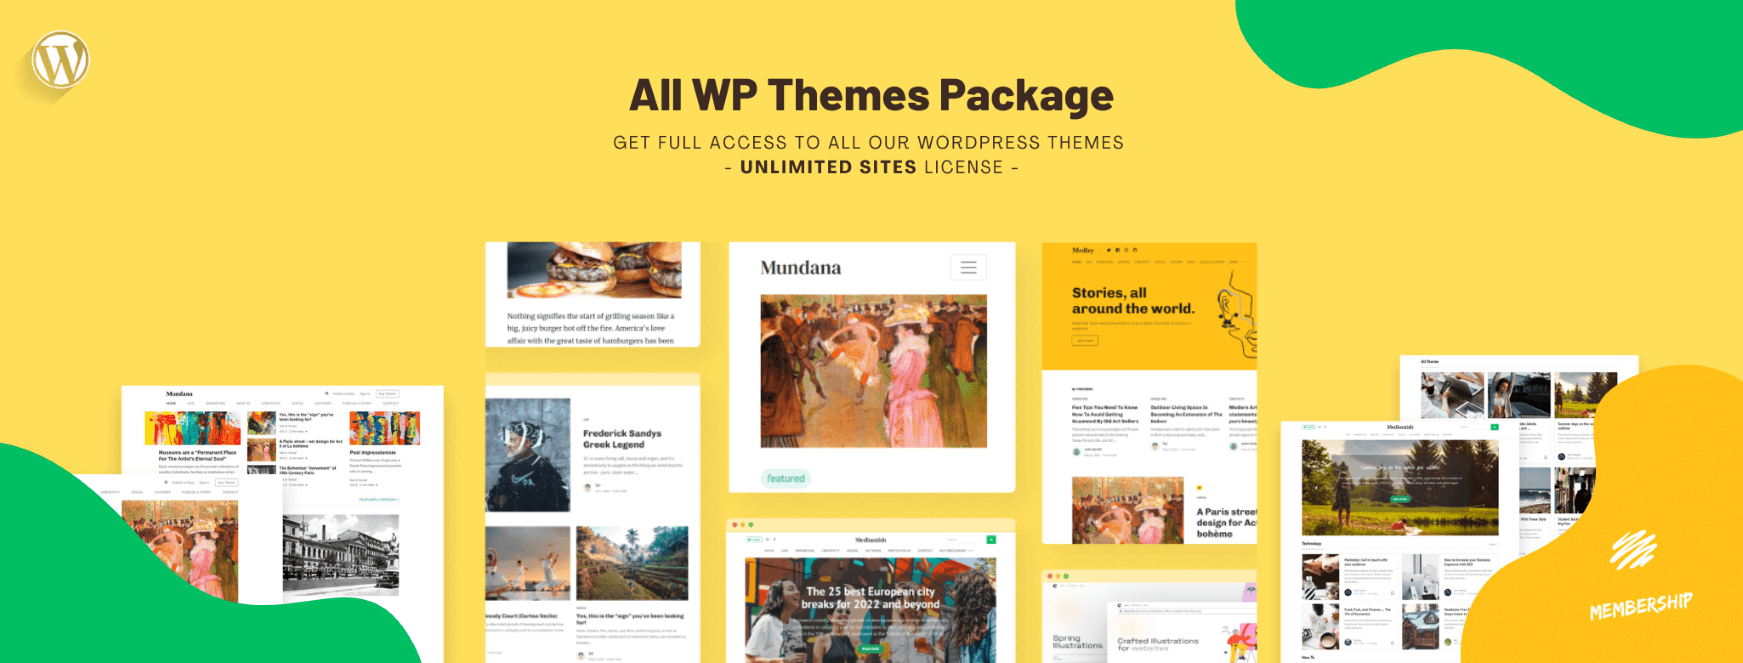 All WordPress Themes Package